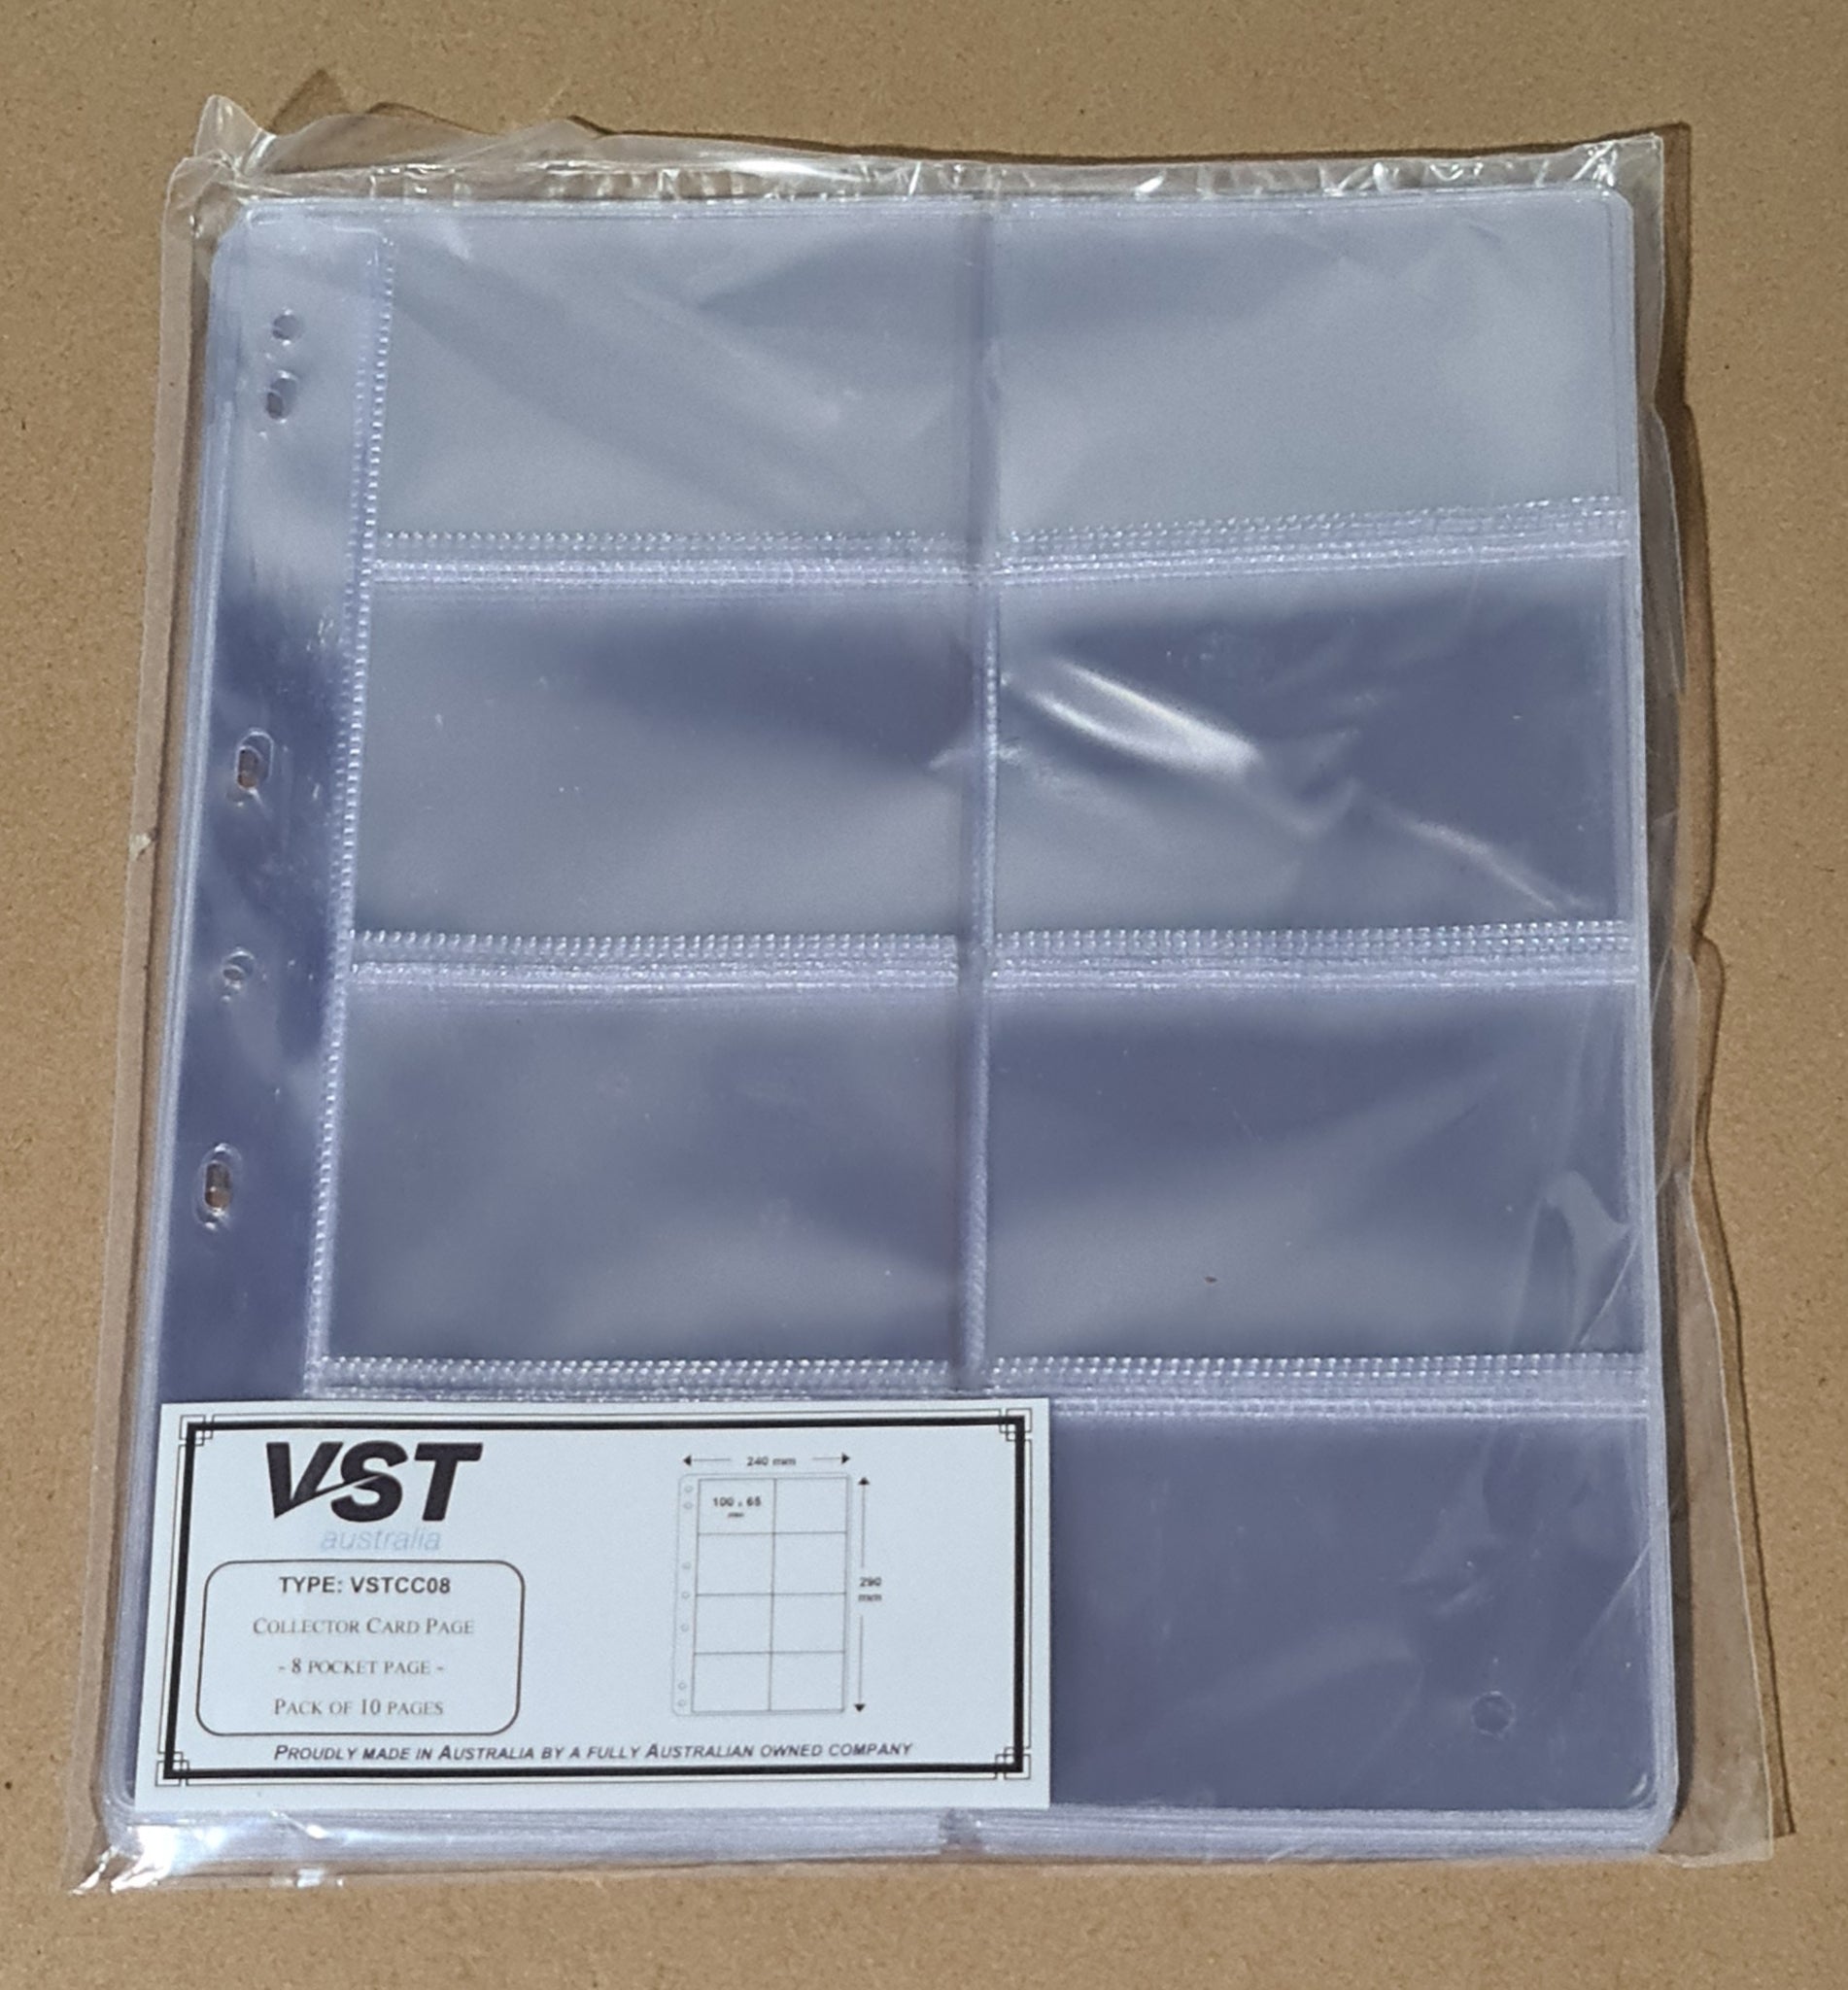 VST Coin Album 8 Pocket Refill Suitable for Collector Cards
PK10